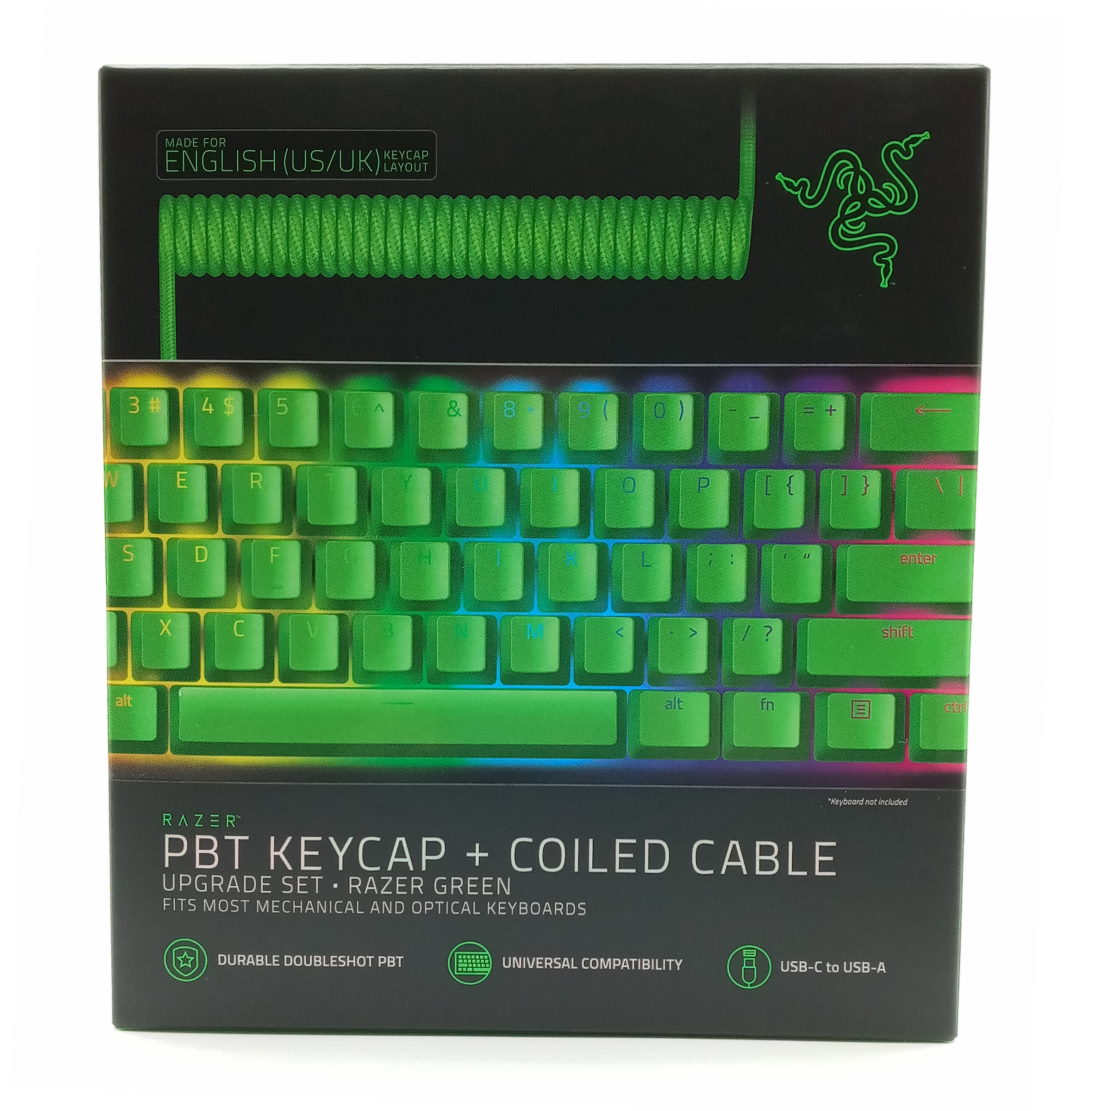 5 Razer PBT Keycap Coiled Cable Upgrade Set Review